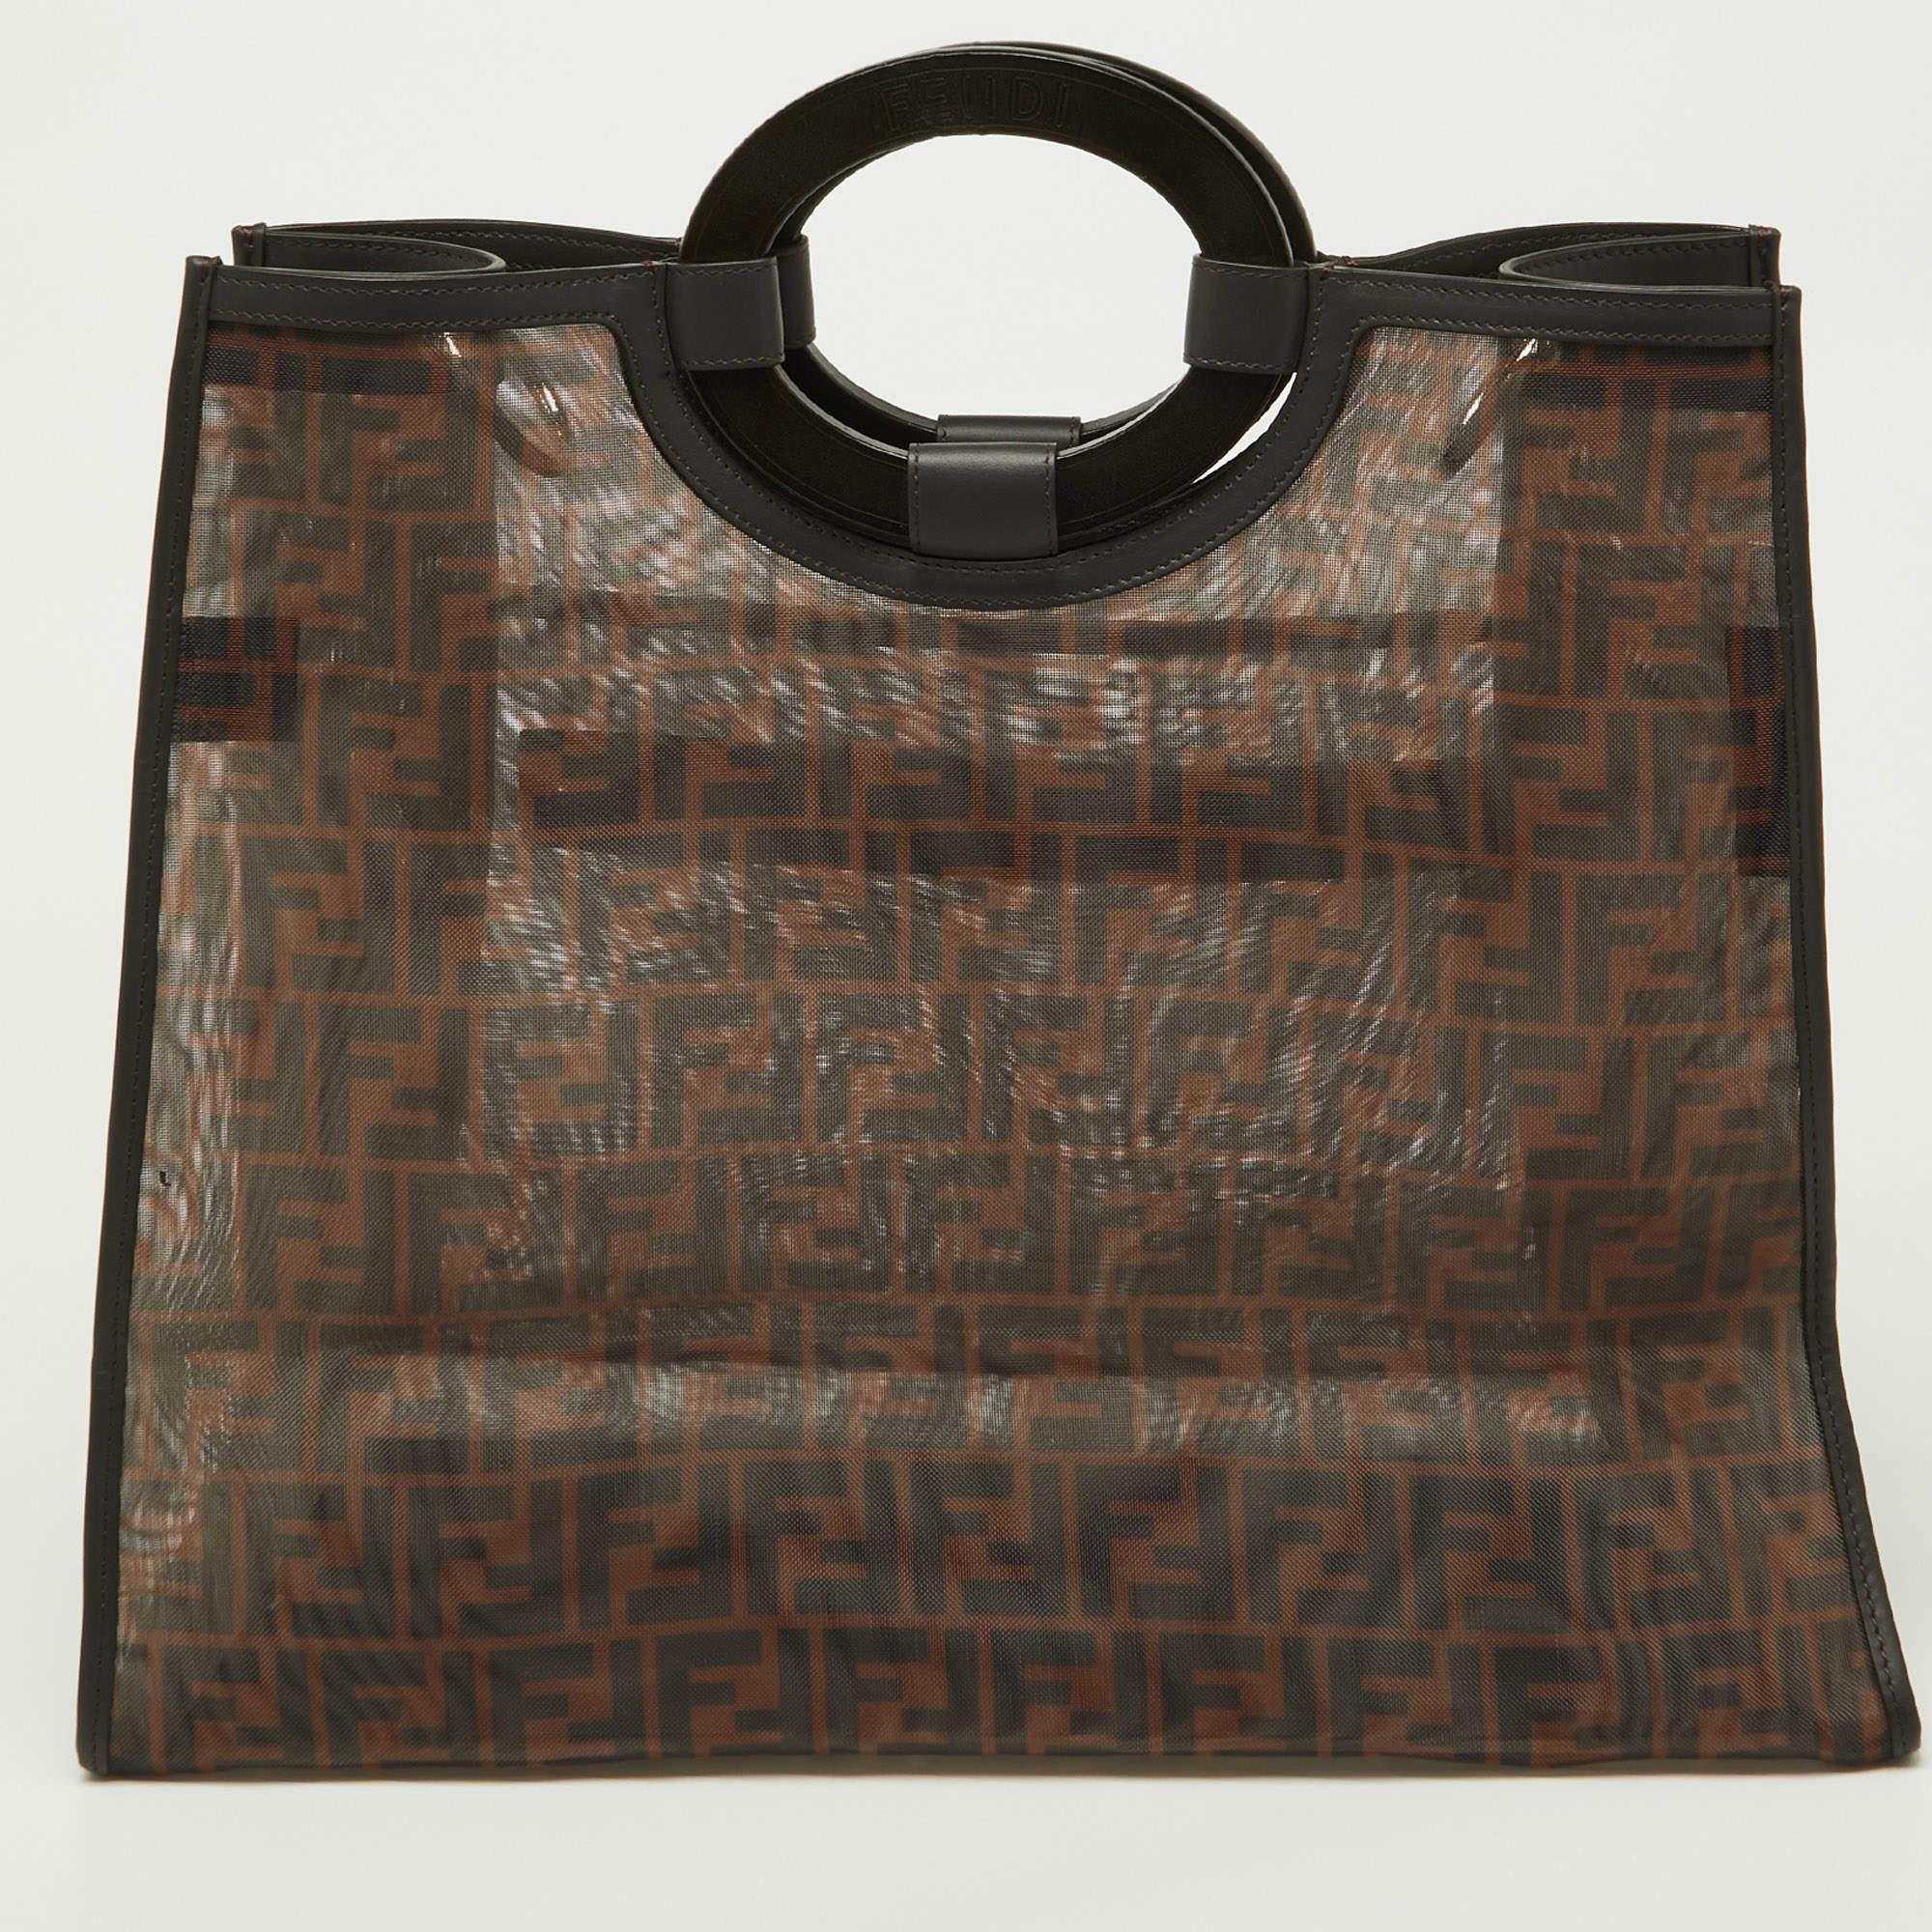 This Fendi Runaway shopper tote is sure to grab you never-ending compliments! It is crafted from tobacco Zucca mesh and features dual top handles, silver-tone hardware, and a front zip pocket. It opens to a spacious interior that can easily store